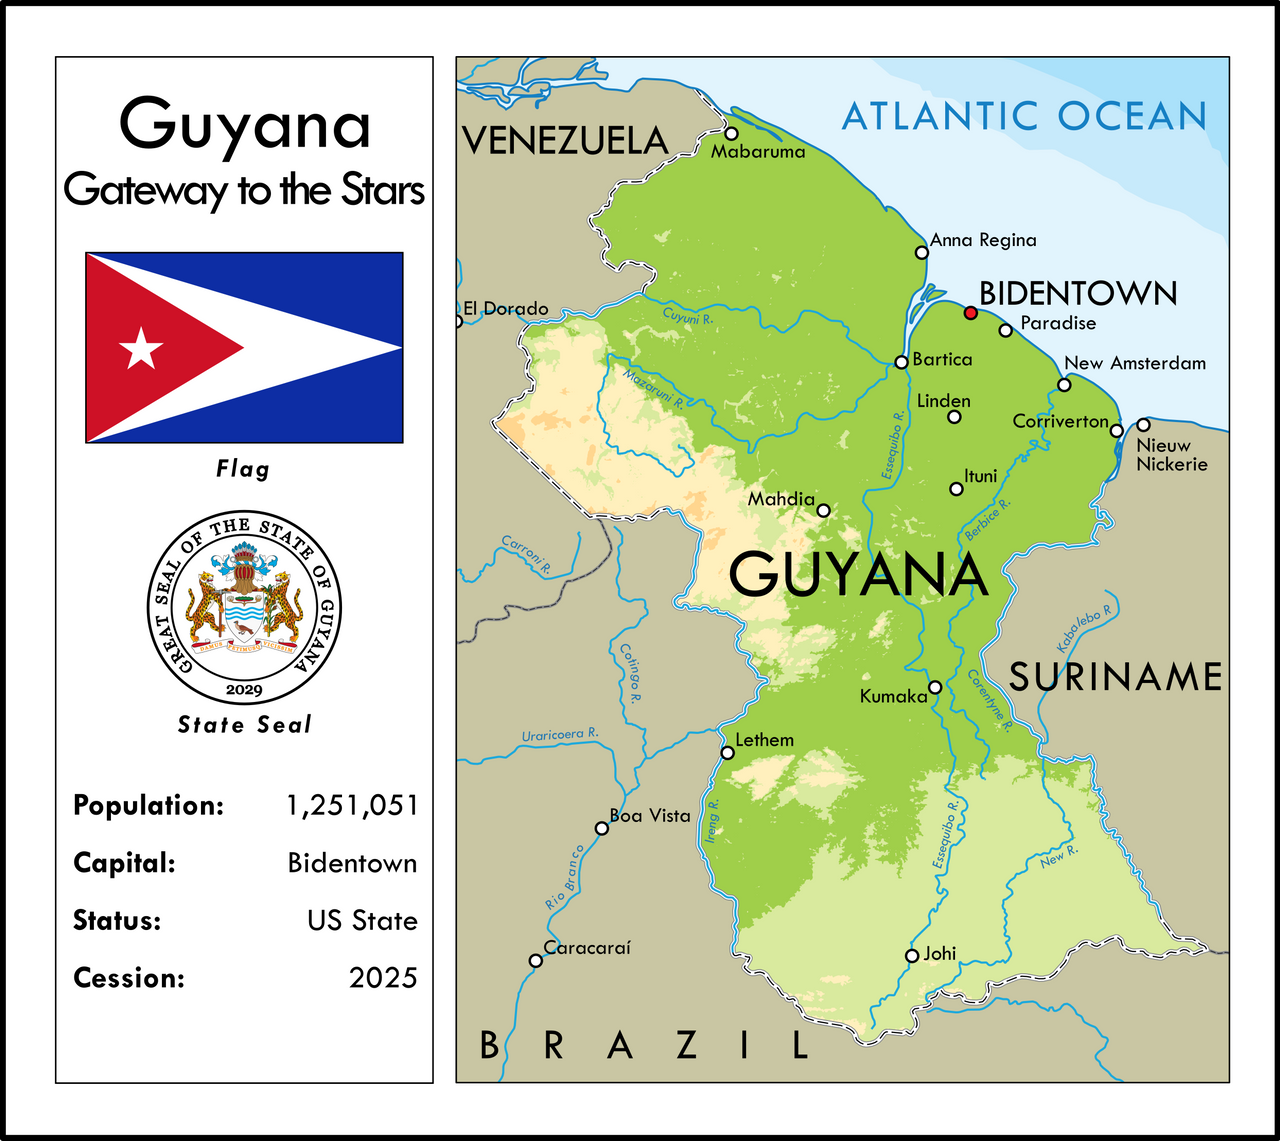 state_of_guyana_by_ynot1989_dgjan78-fullview.png